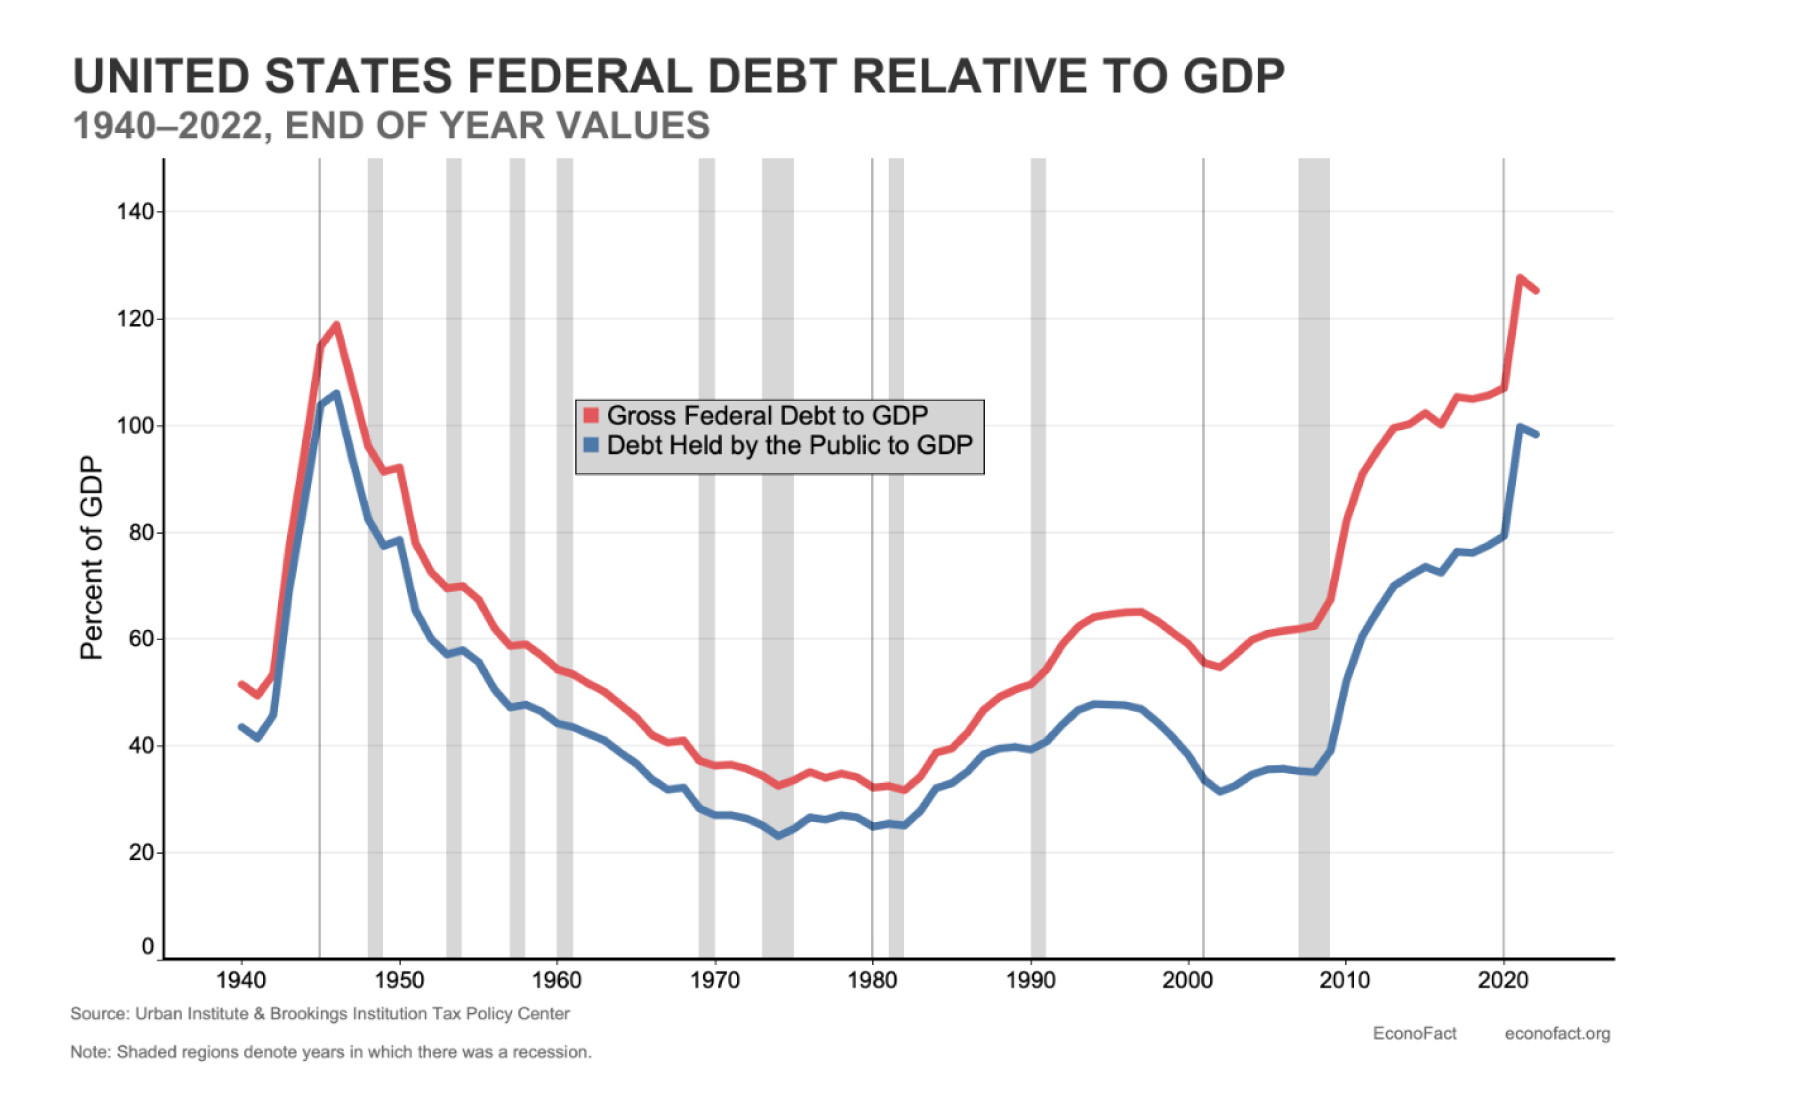 A graph showing the united states federal debt relative to gdp